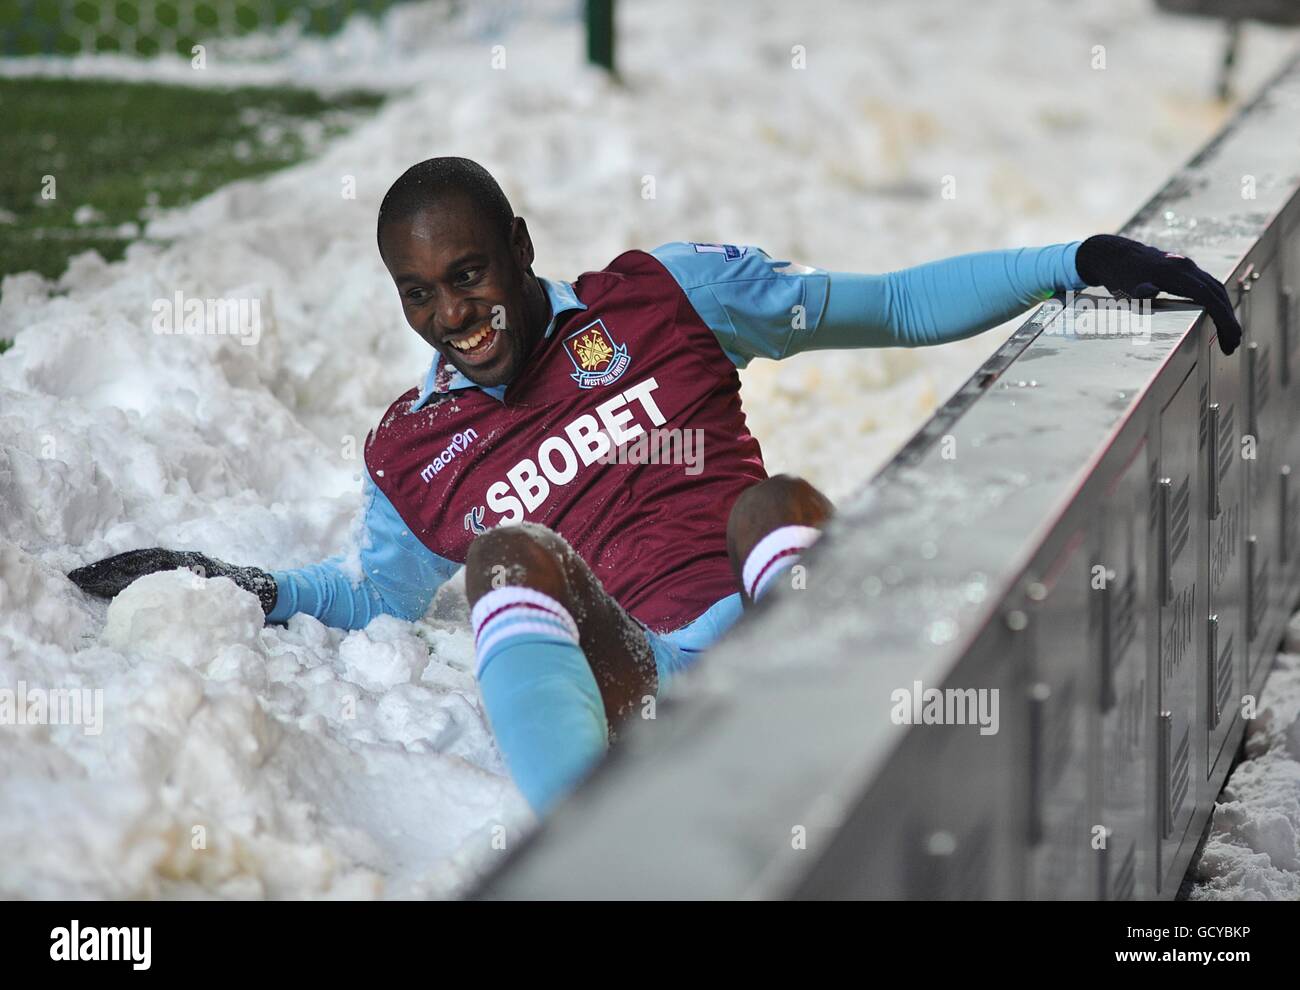 West Ham United's Carlton Cole falls into the snow during the match Stock Photo